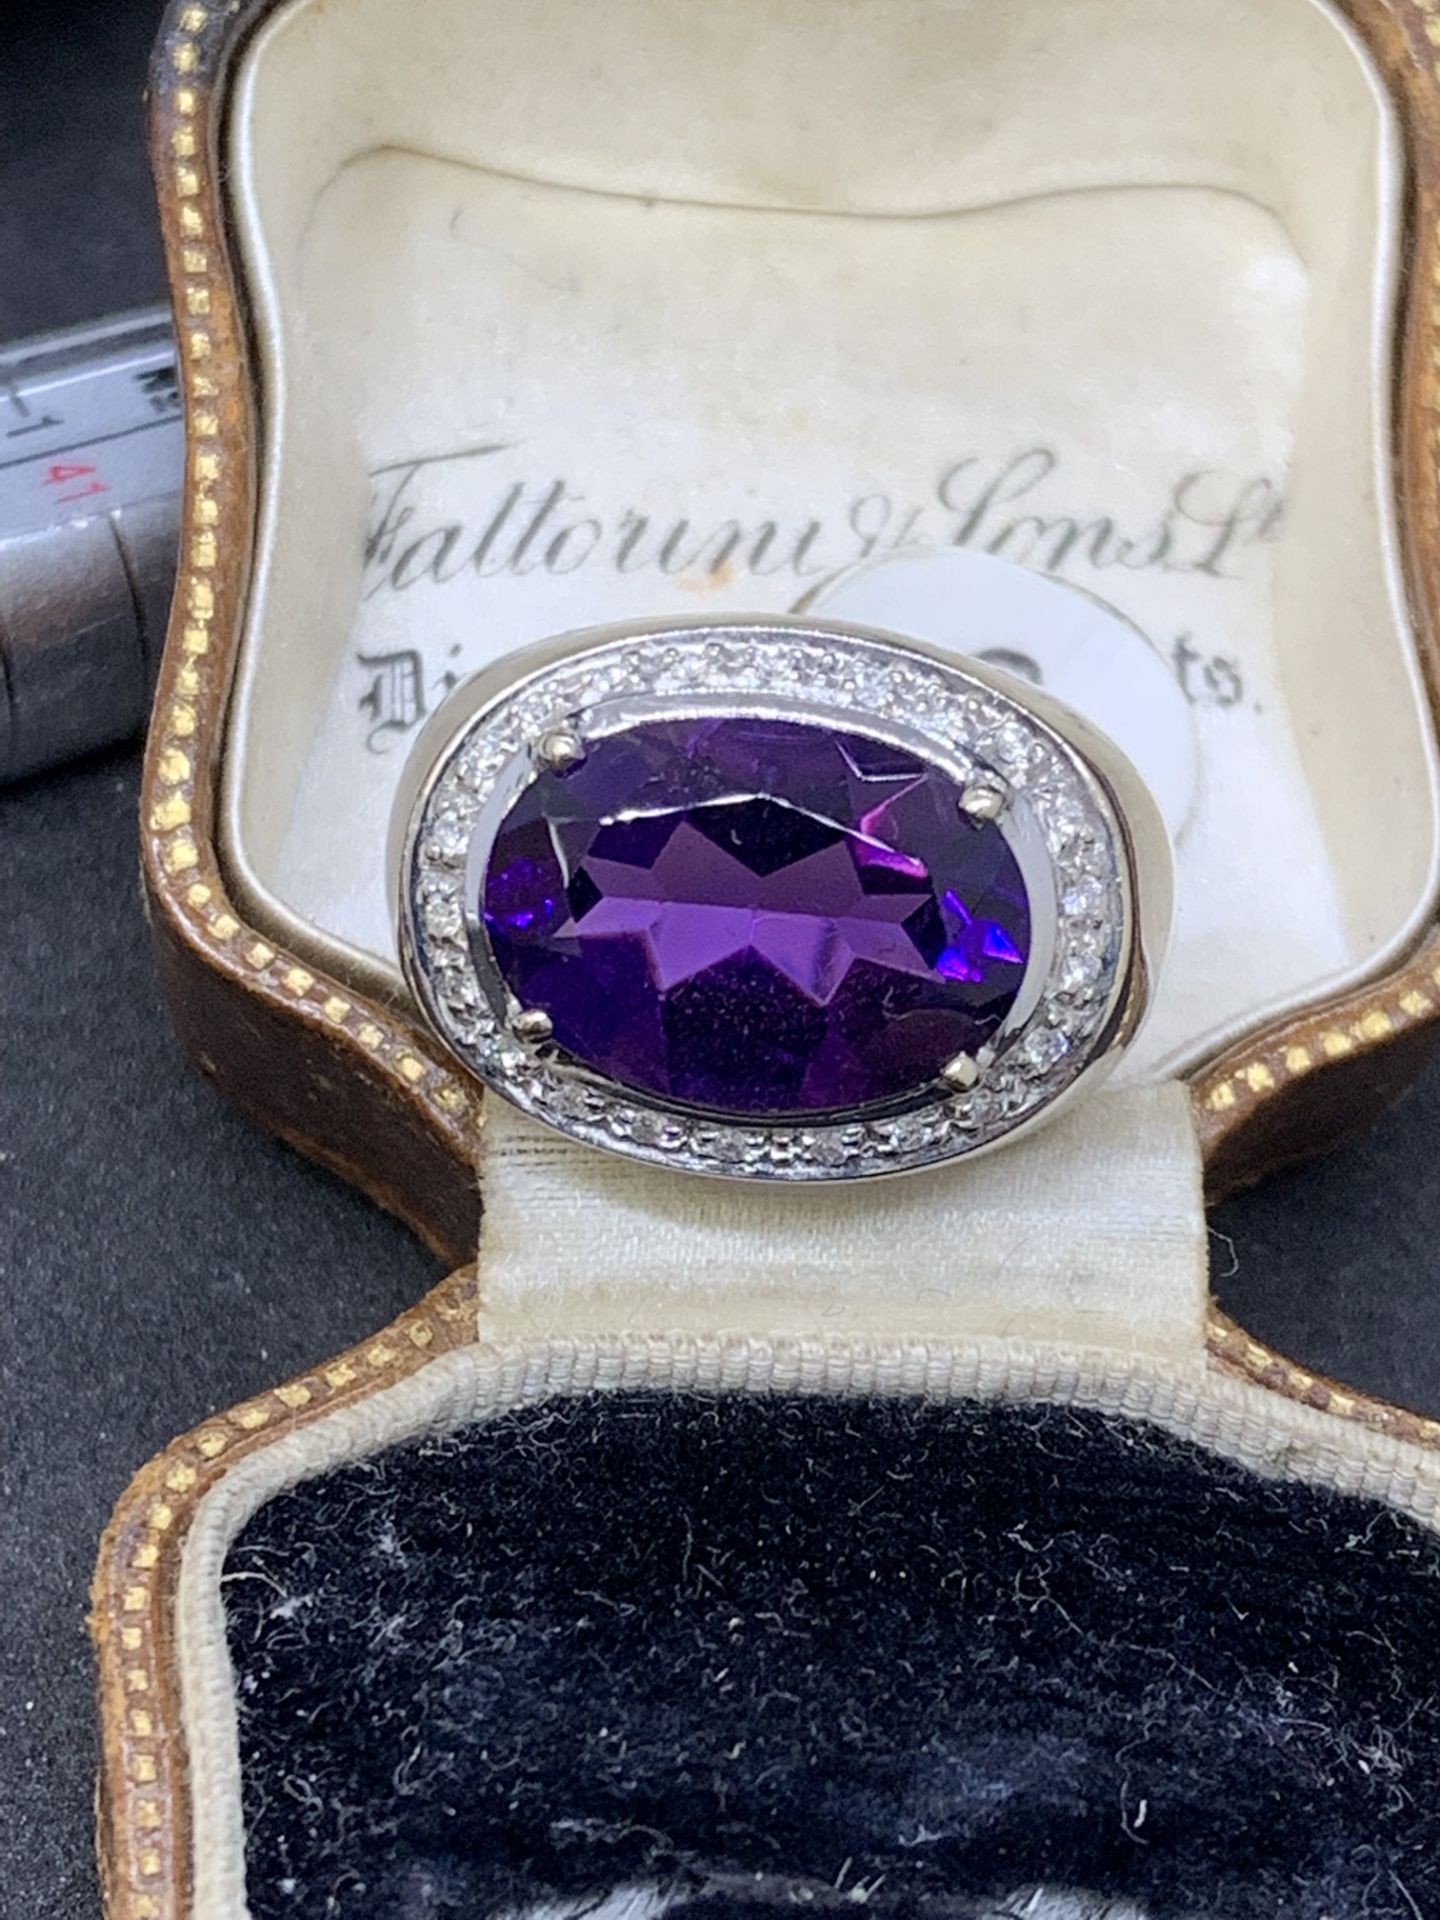 18 carat gold ring set with approximately 6 carat amethyst with diamonds approximately 9 g - Image 2 of 4